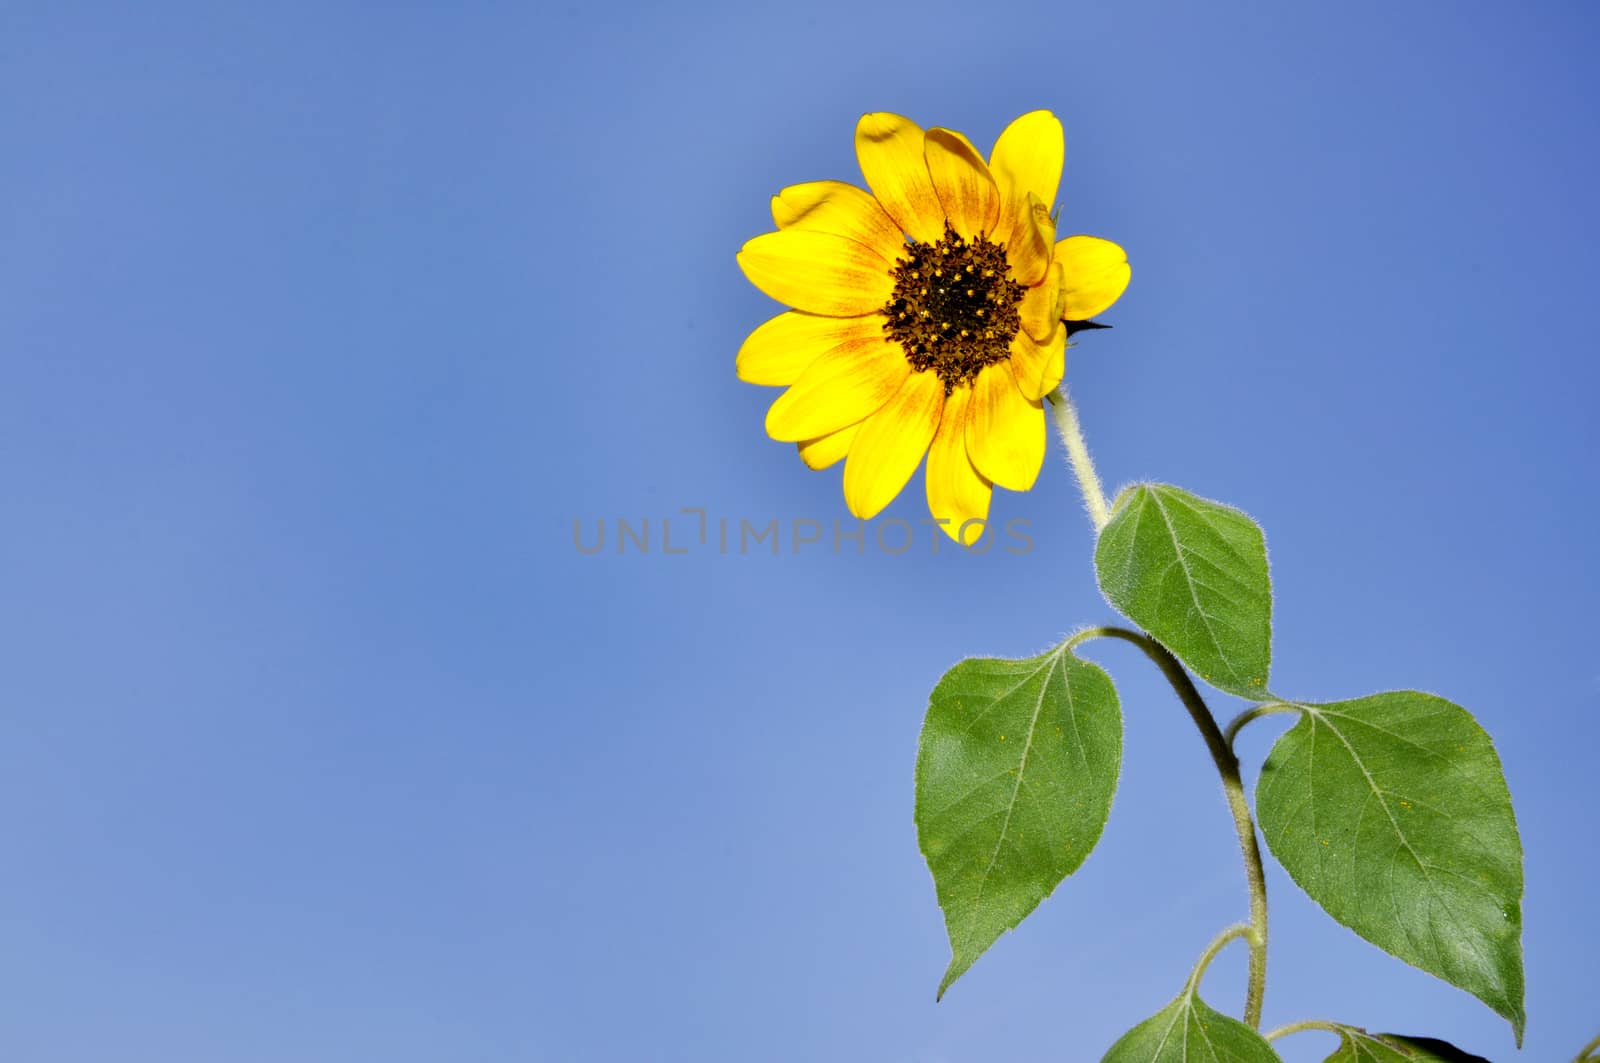 Sunflower by mixeey